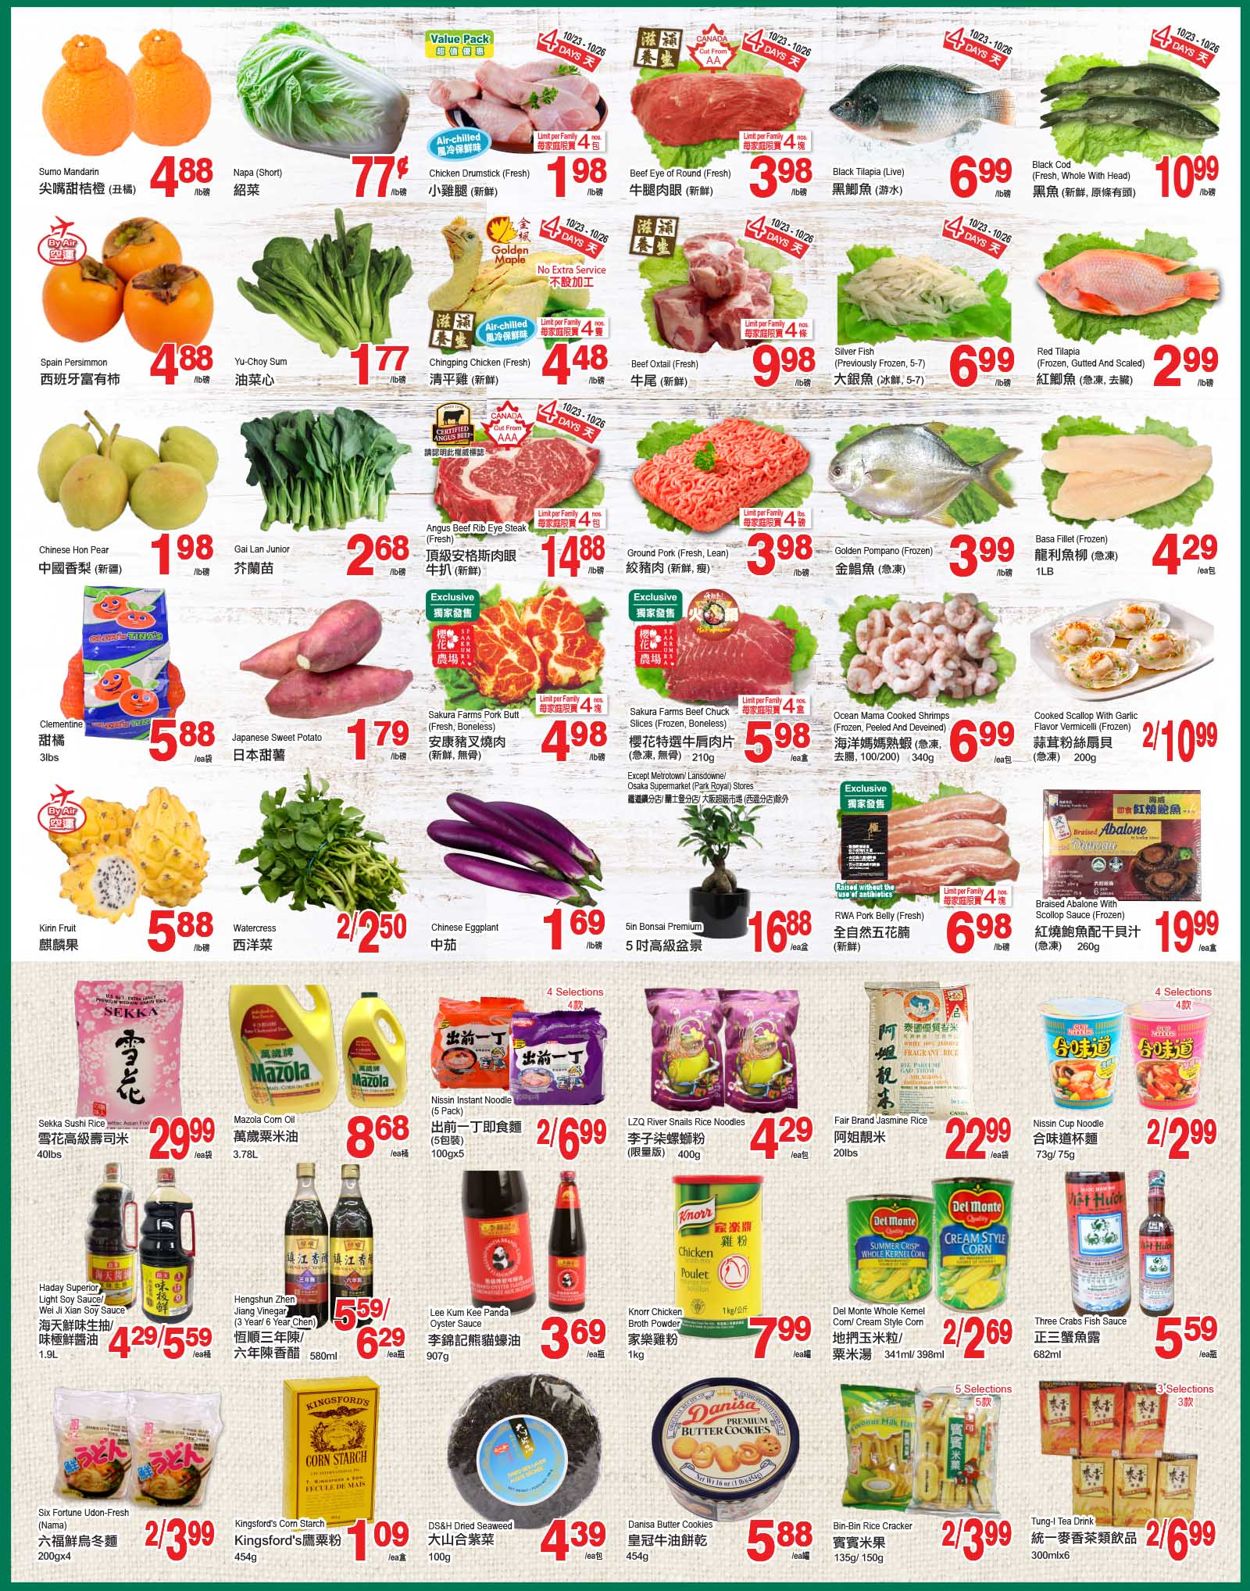 T&T Supermarket Flyer from 10/23/2020